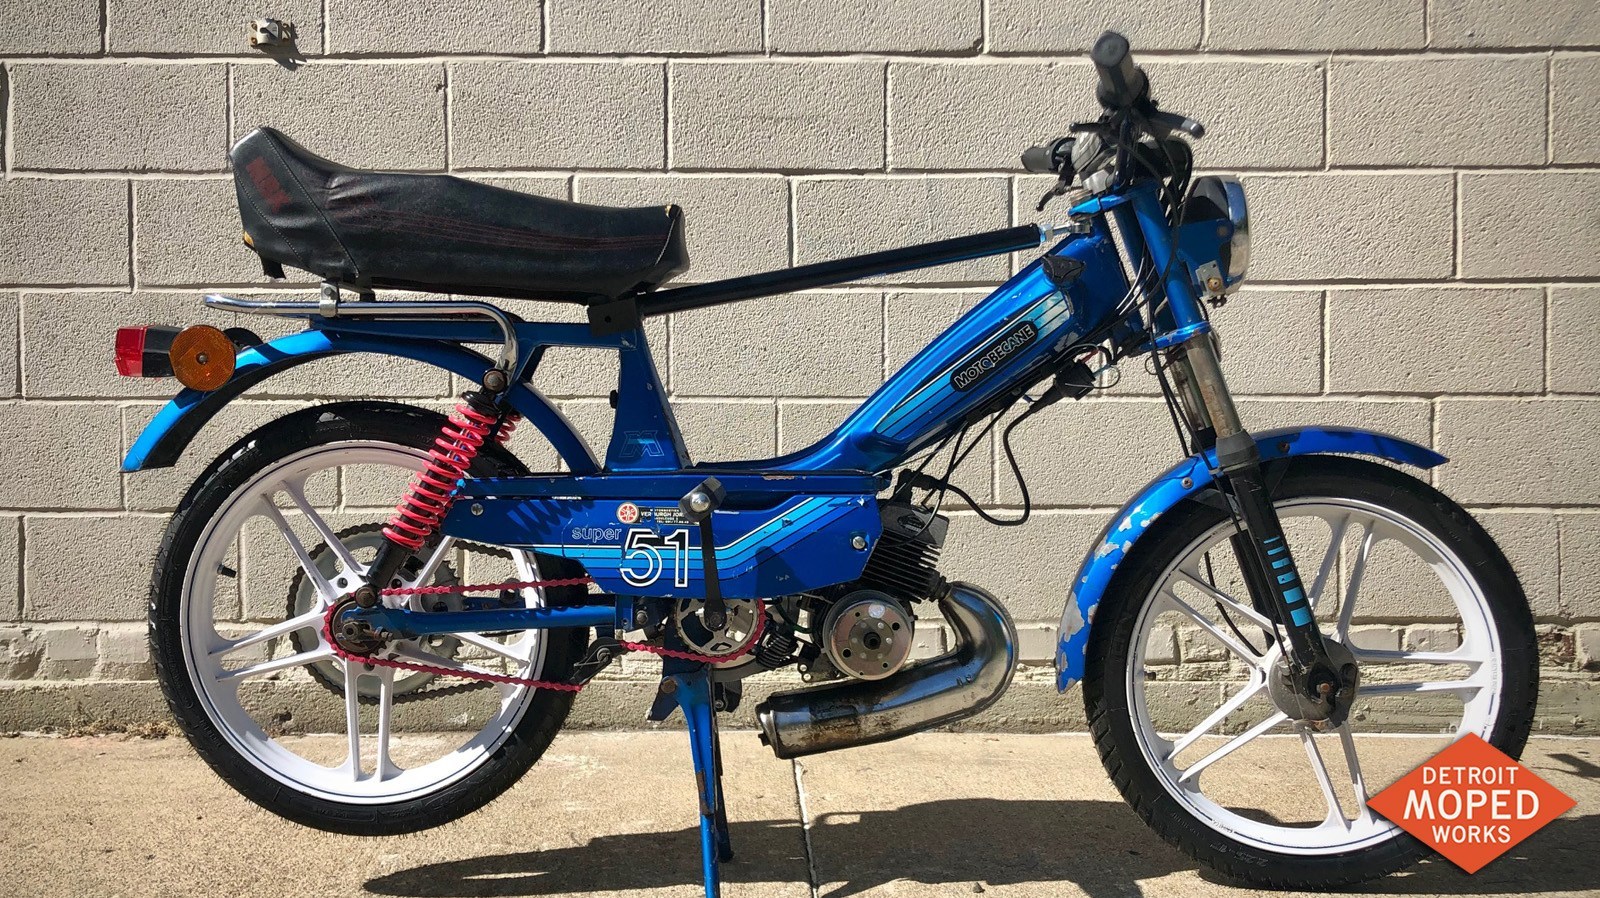 Rare Euro Only Motobecane Super 51 from private collection - as is —  Detroit Moped Works